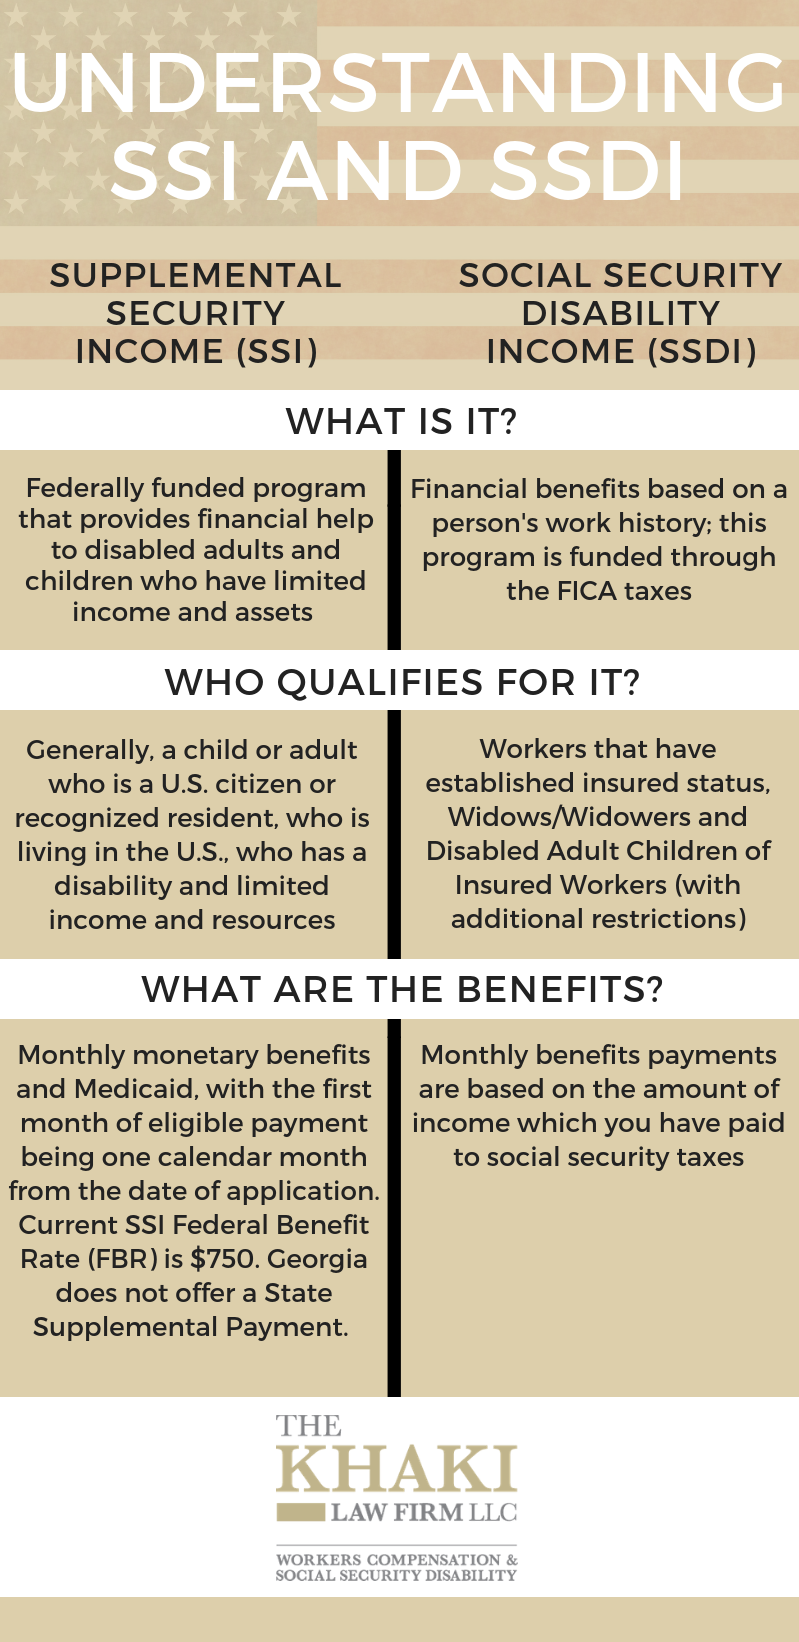 What is the Difference between SSI and Social Security Disability Income?